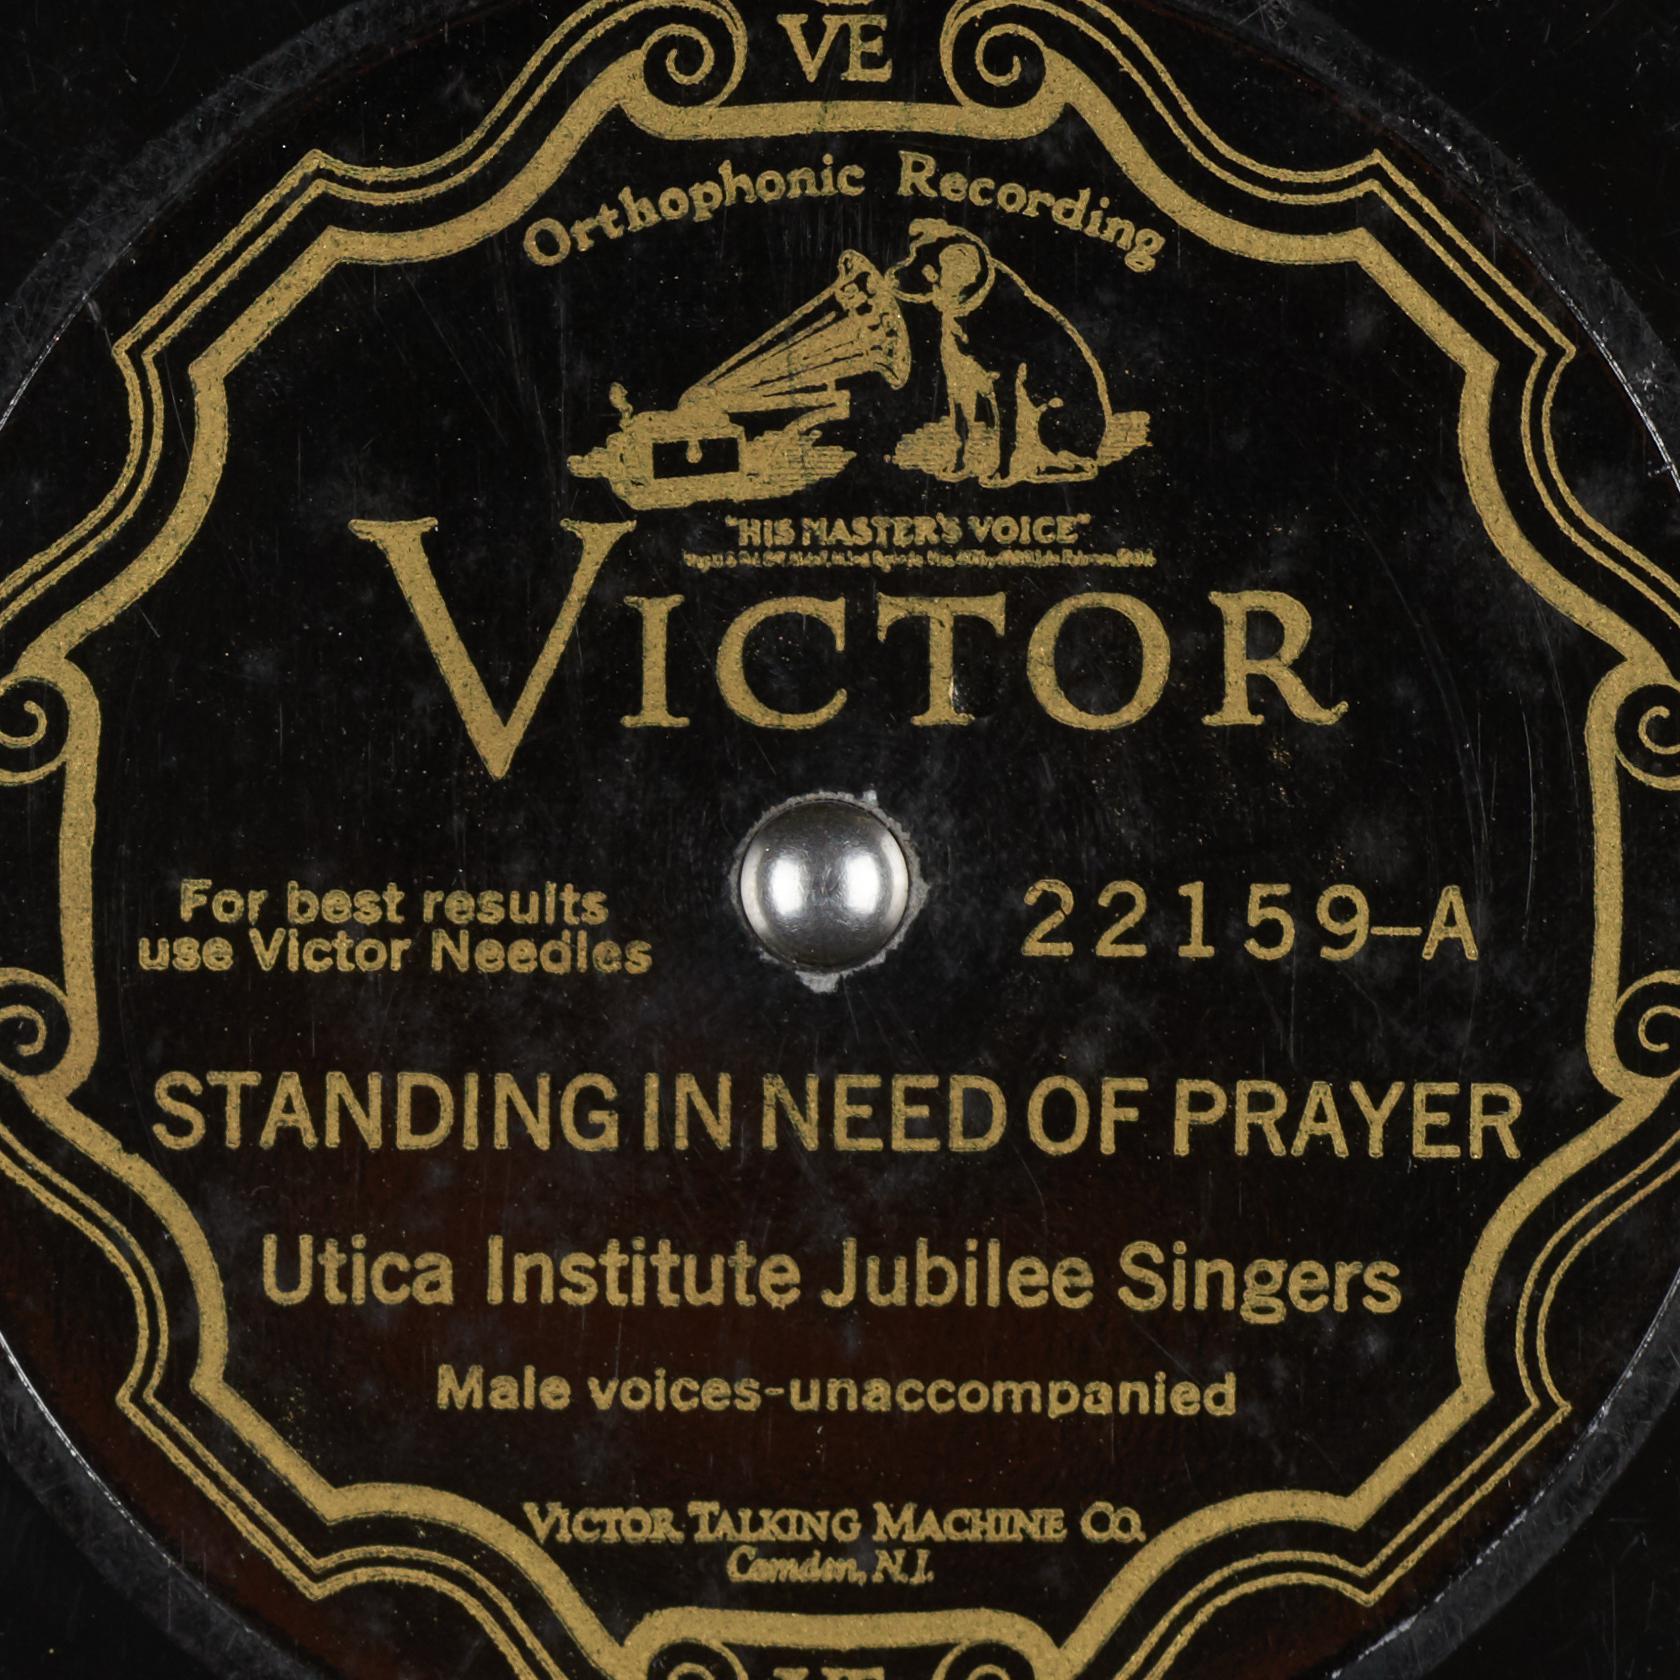 Standing in Need of Prayer label